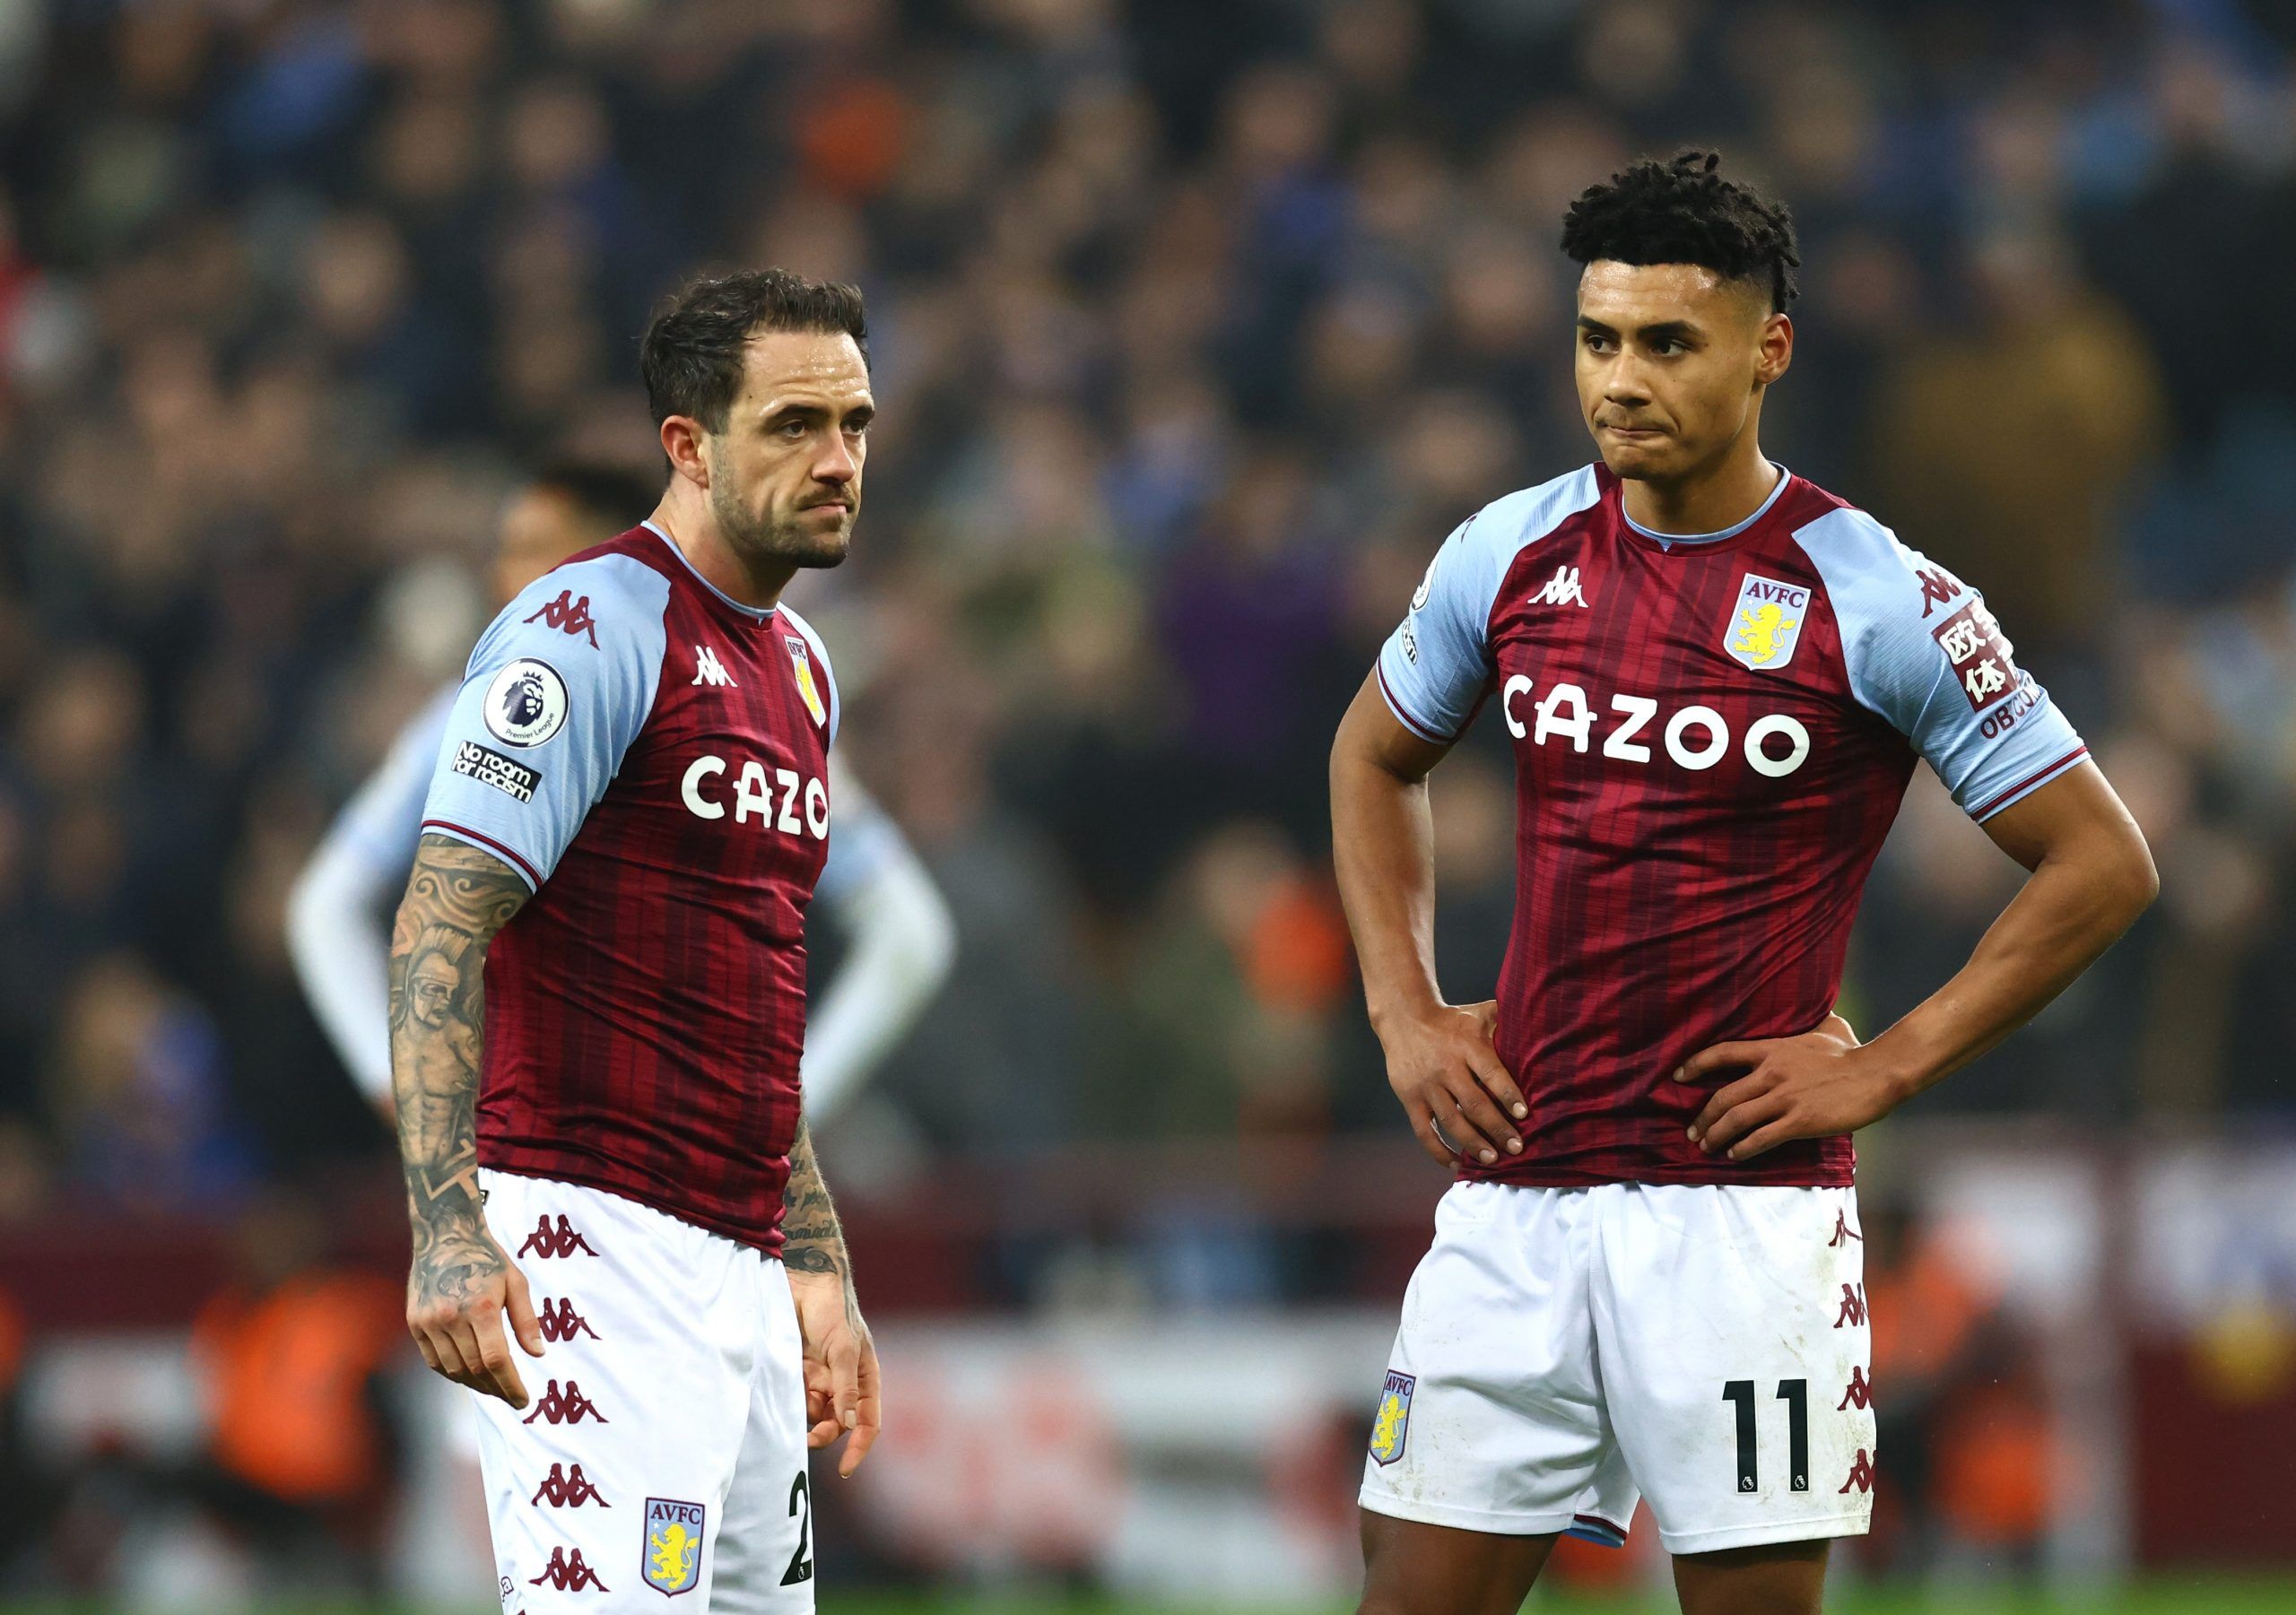 danny-ings-aston-villa-premier-league-transfer-news-steven-gerrard-latest-brighton-givemesport-josh-holland-ings-departure-updateSoccer Football - Premier League - Aston Villa v Chelsea - Villa Park, Birmingham, Britain - December 26, 2021 Aston Villa's Danny Ings and Ollie Watkins REUTERS/David Klein EDITORIAL USE ONLY. No use with unauthorized audio, video, data, fixture lists, club/league logos or 'live' services. Online in-match use limited to 75 images, no video emulation. No use in betting